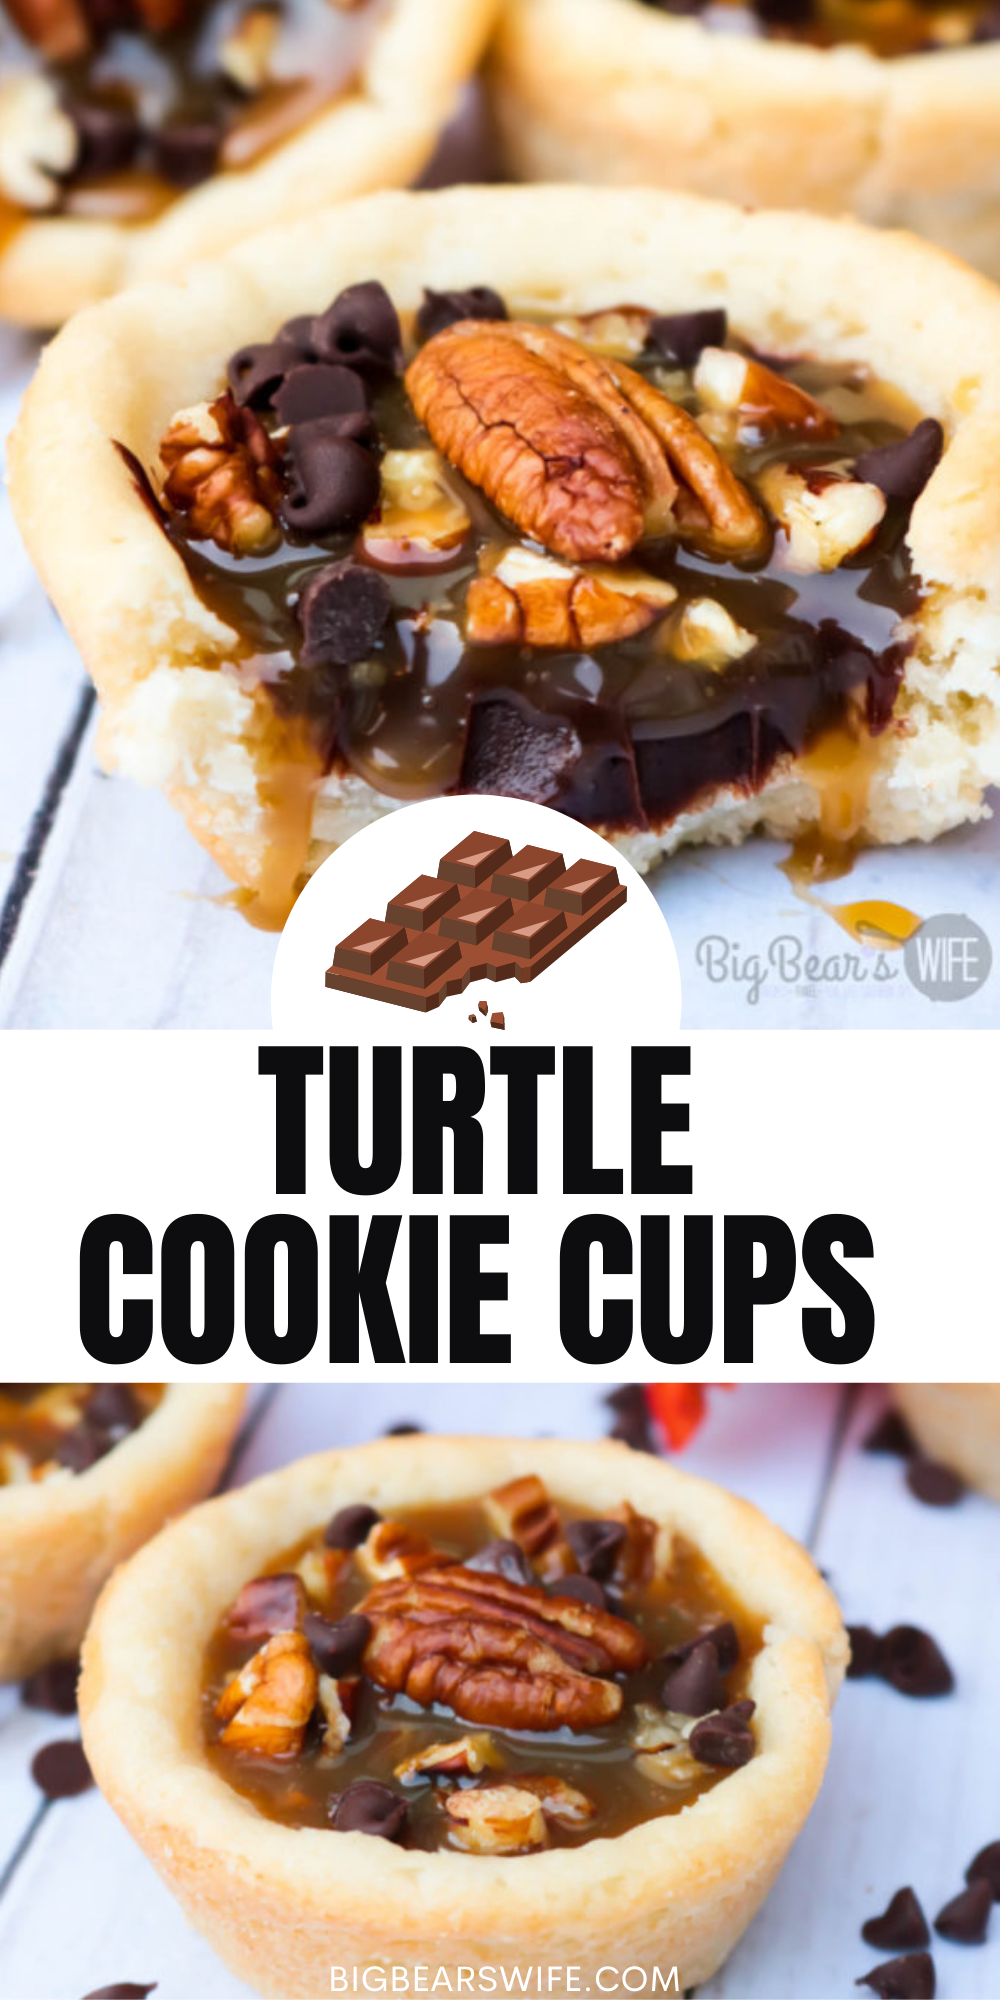 Easy, portable and delicious – these Turtle Cookie Cups are a dessert for any occasion. These delicious sugar cookie cups are filled with a homemade chocolate ganache, a layer of chopped pecans and topped with a sweet caramel sauce for a tasty, must-try treat. via @bigbearswife